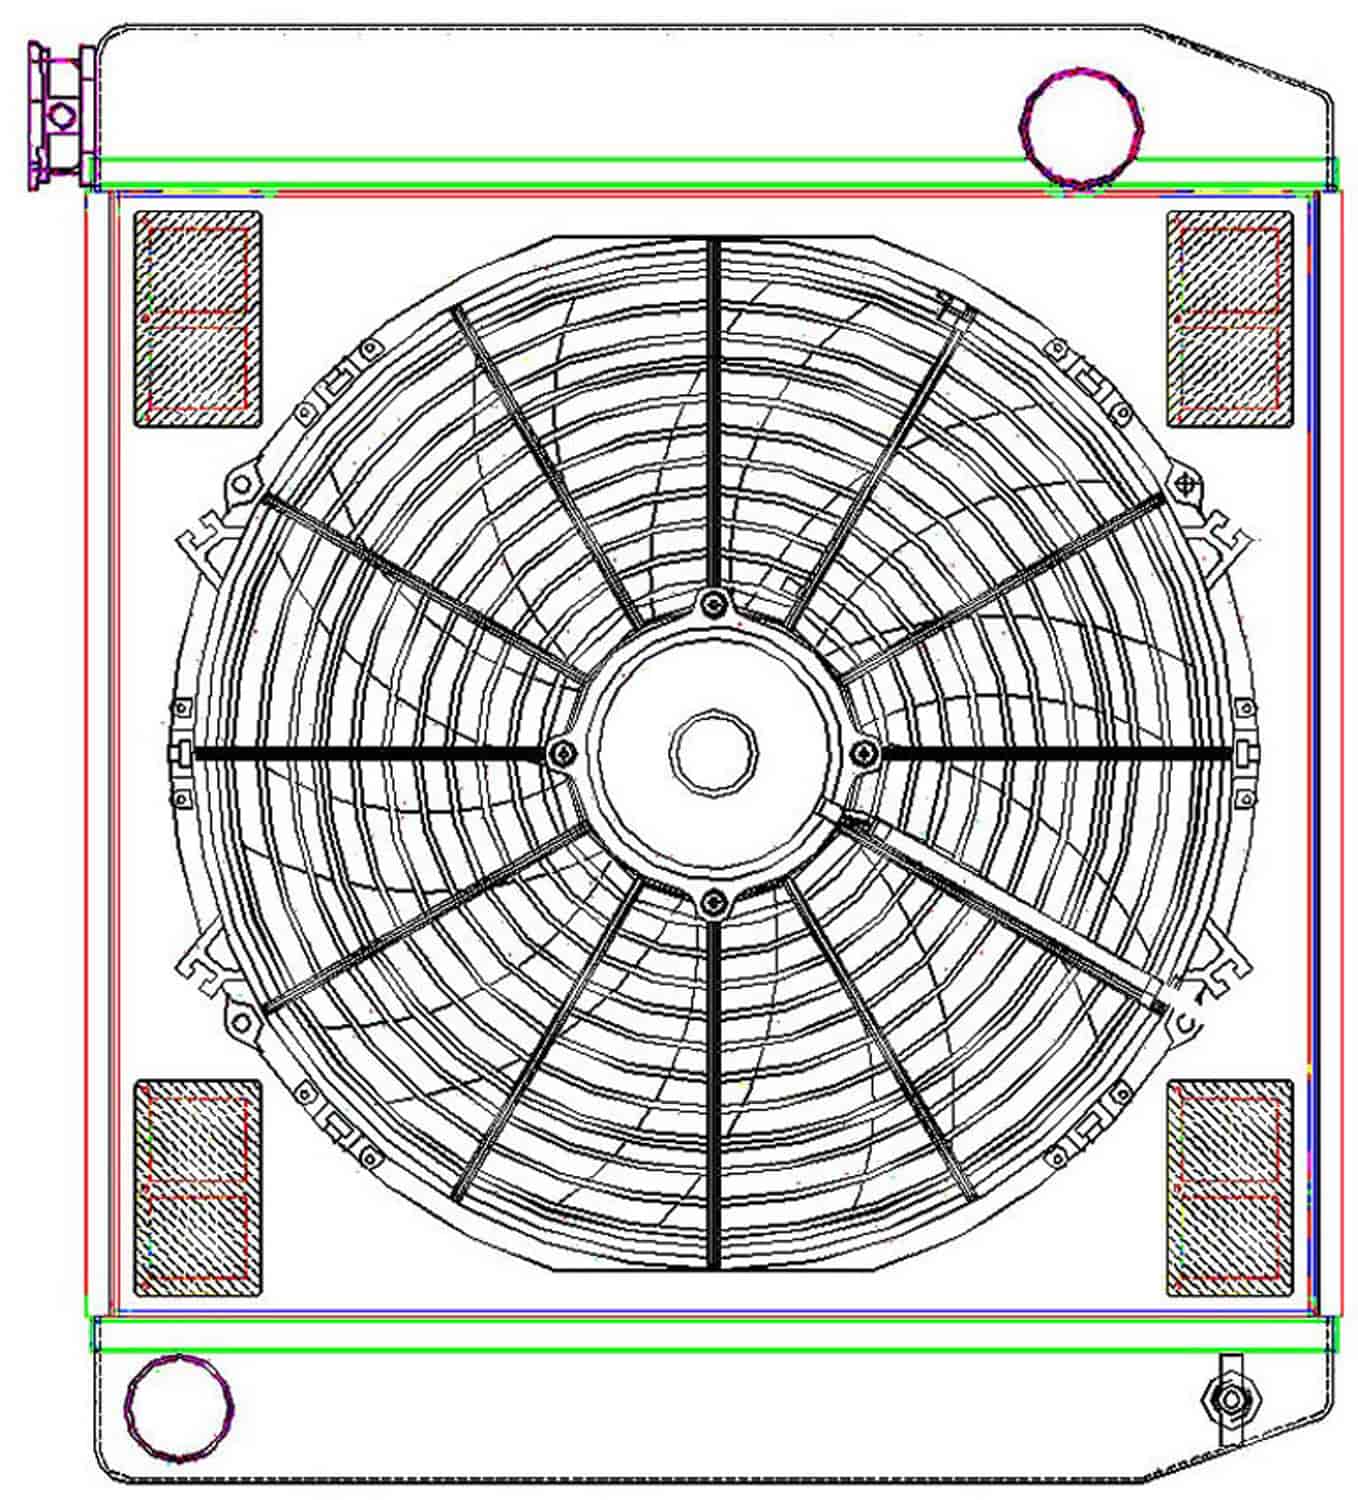 MegaCool ComboUnit Universal Fit Radiator and Fan Single Pass Crossflow Design 22" x 19" with Straight Outlet